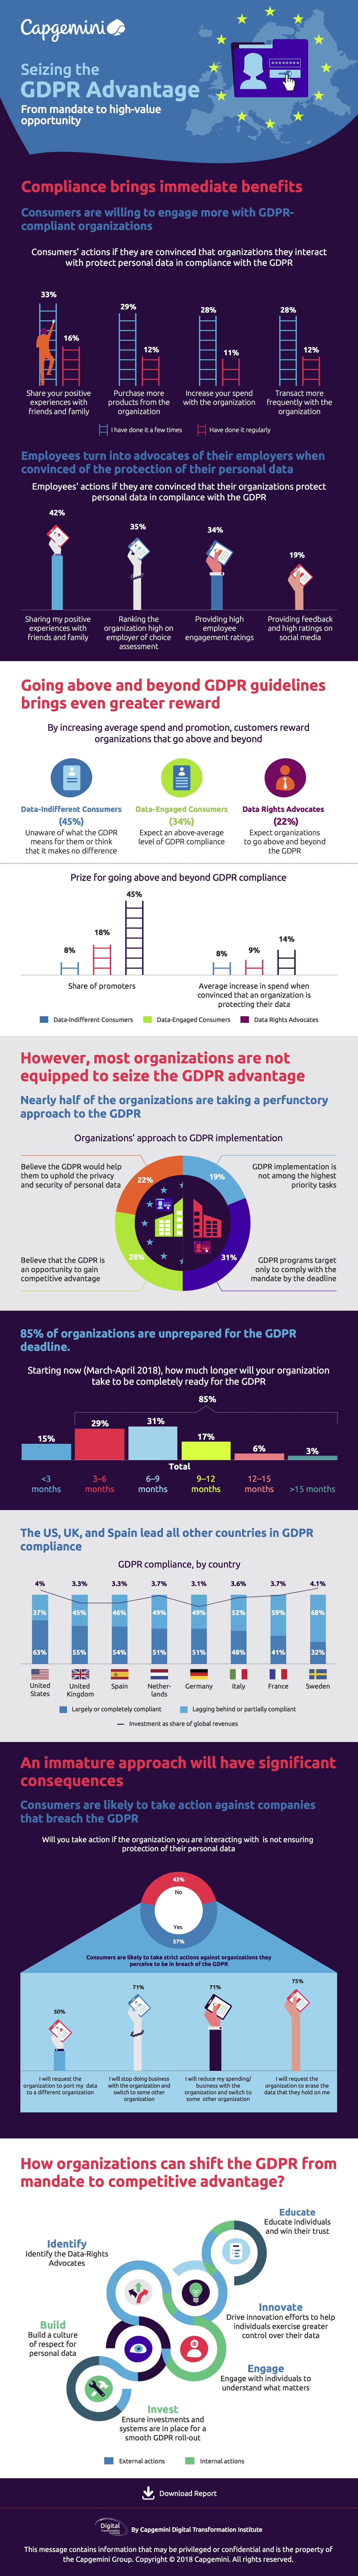 Are you not ready for GDPR, coming this week? You’re not alone